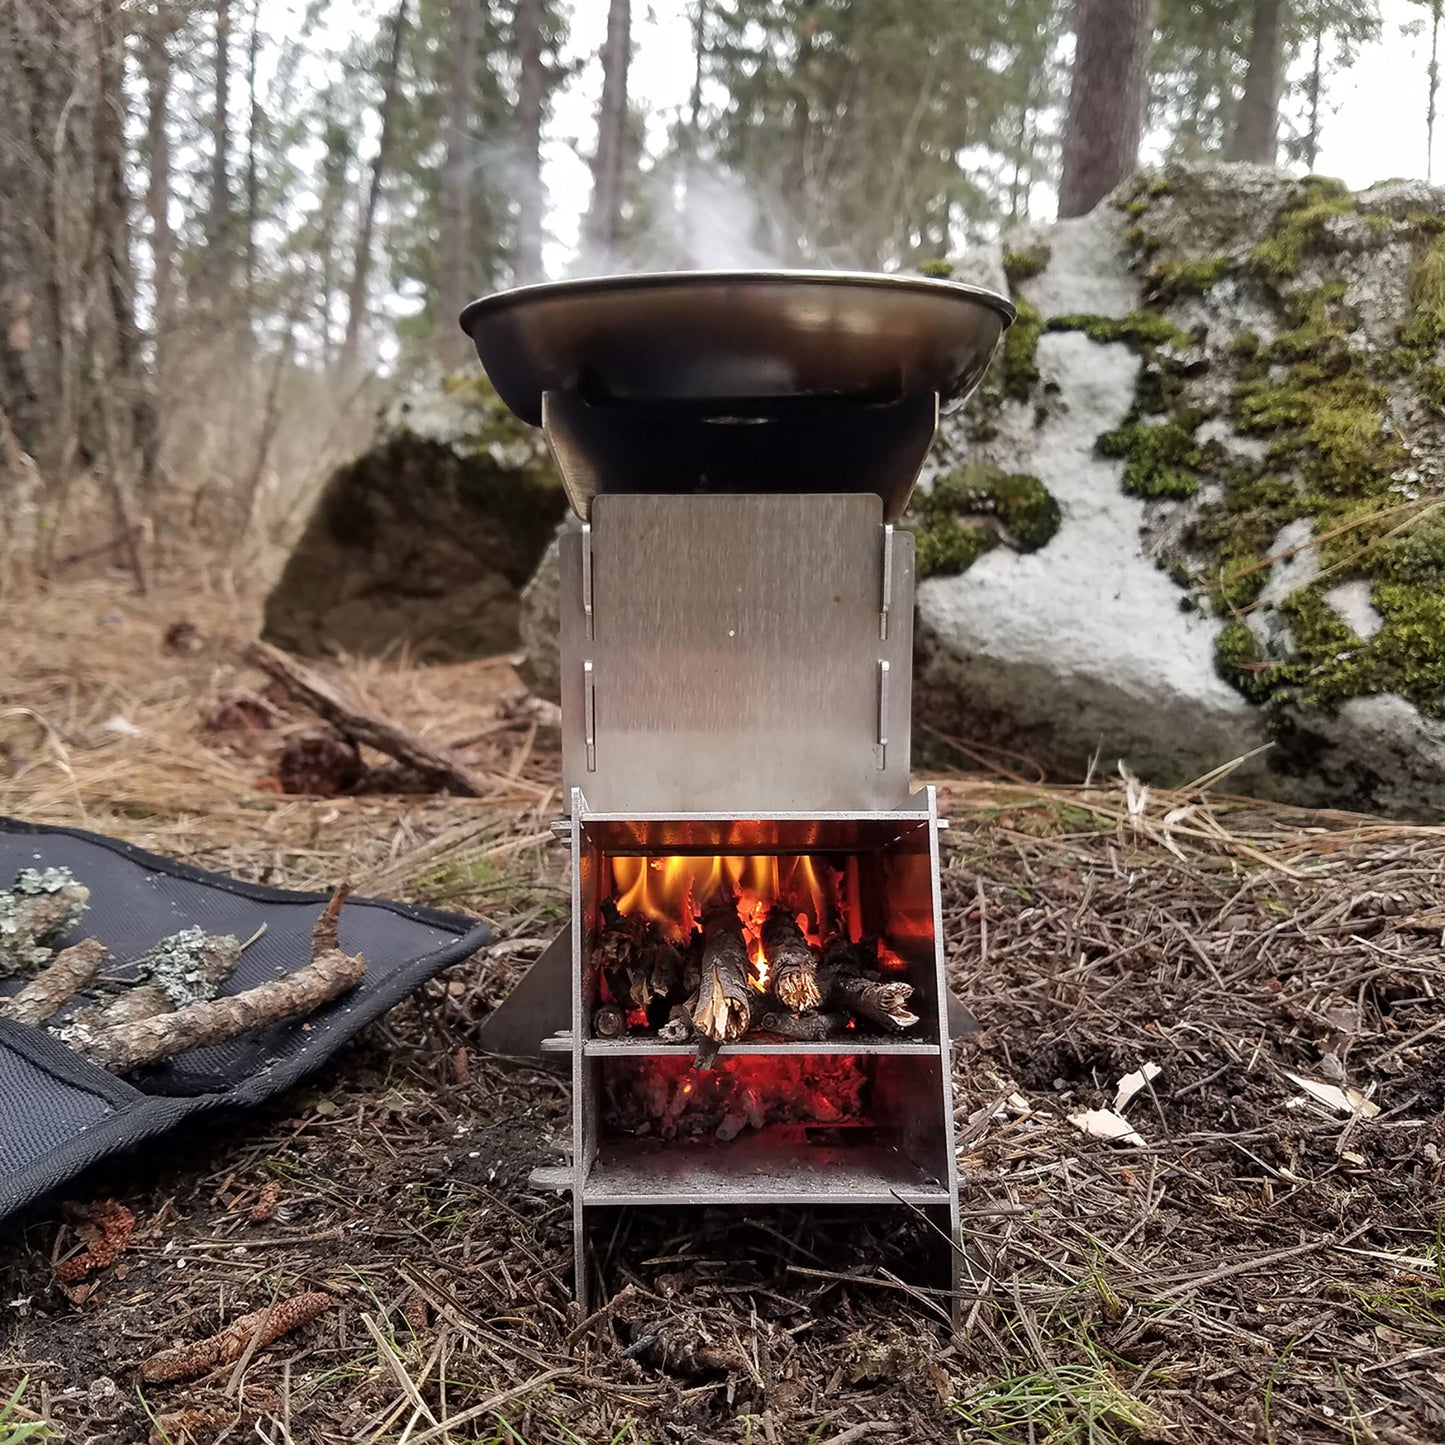 This flat packing twig rocket stove is great for camping, hiking, backpacking, hunting and wilderness survival. This stove uses twigs for fuel and cooks food and boil water quickly. Made from stainless steel, this portable stove can be set up within minute and boiling water in less than 3 minutes. Includes a super tough carrying case made from 1680d ballistic nylon.